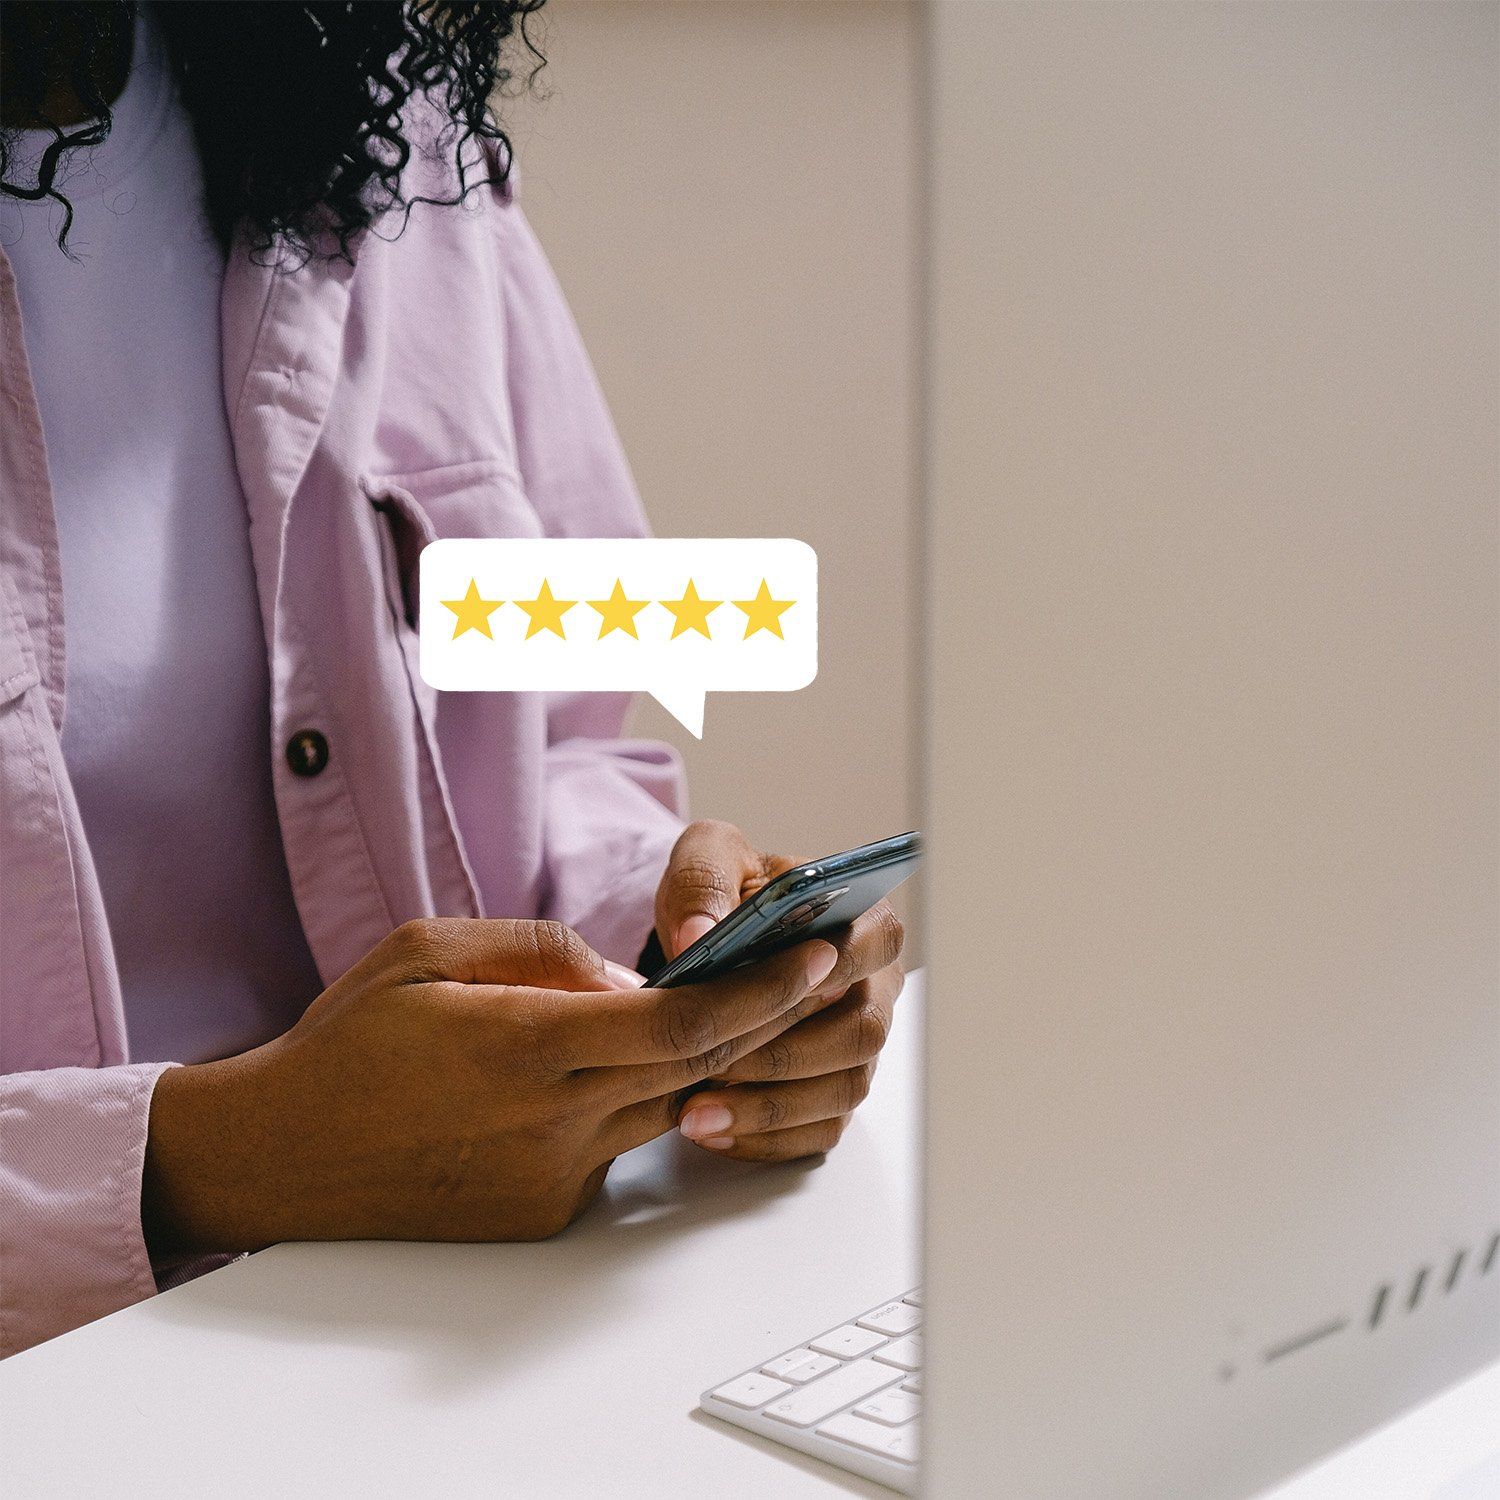 Person typing on phone and 5 stars above the phone